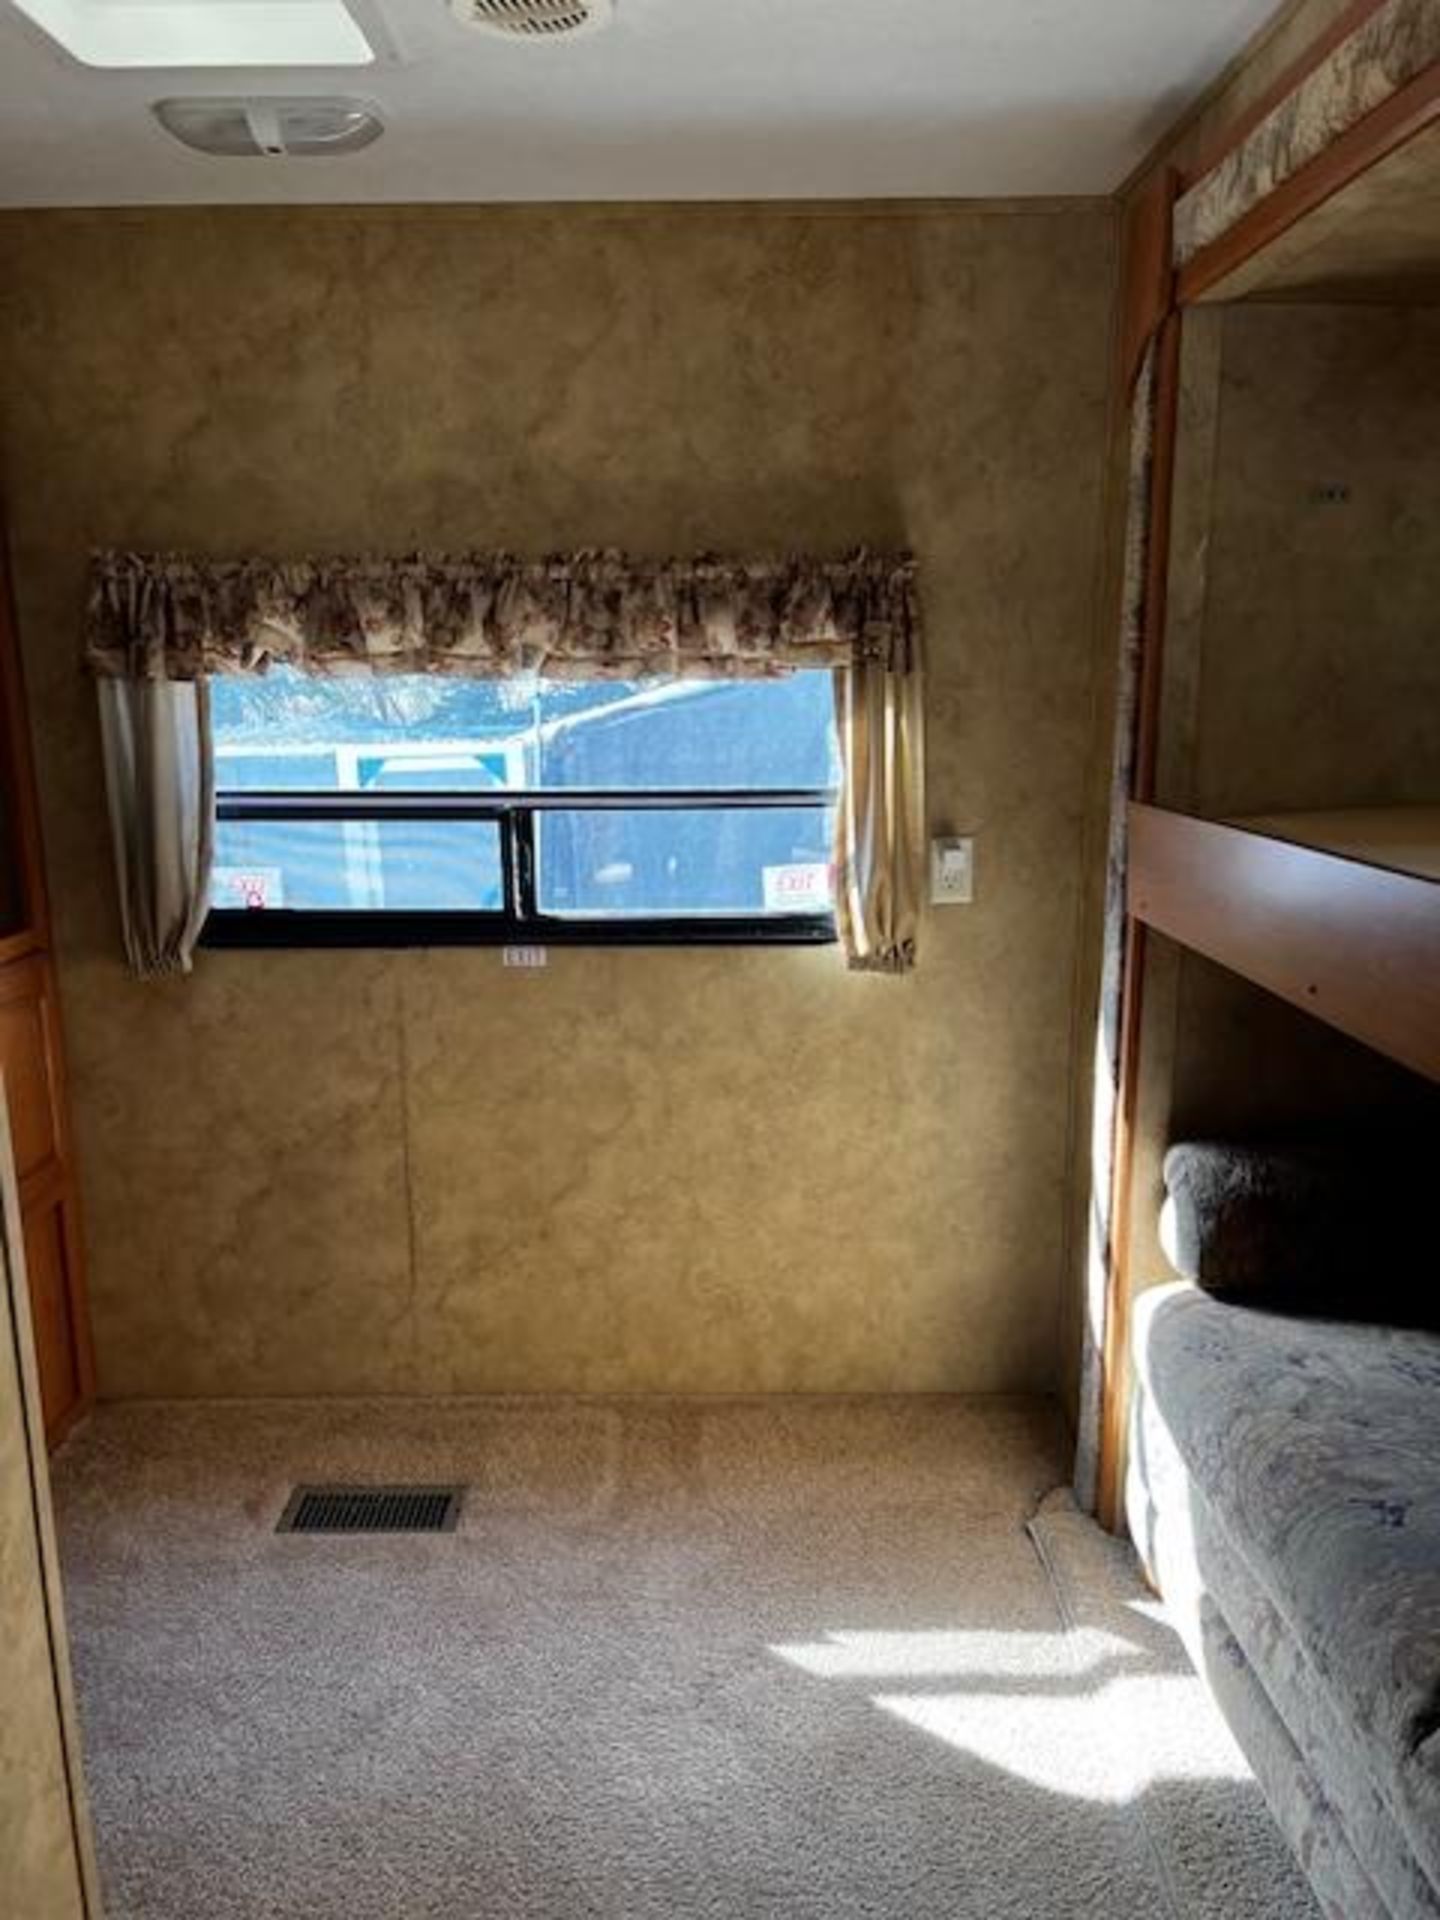 2008 COUGAR 304 VHS 30' TRAVEL TRAILER W/2 S/O, WINTERIZED, S/N: 4YDT304288C507042 - Image 14 of 20